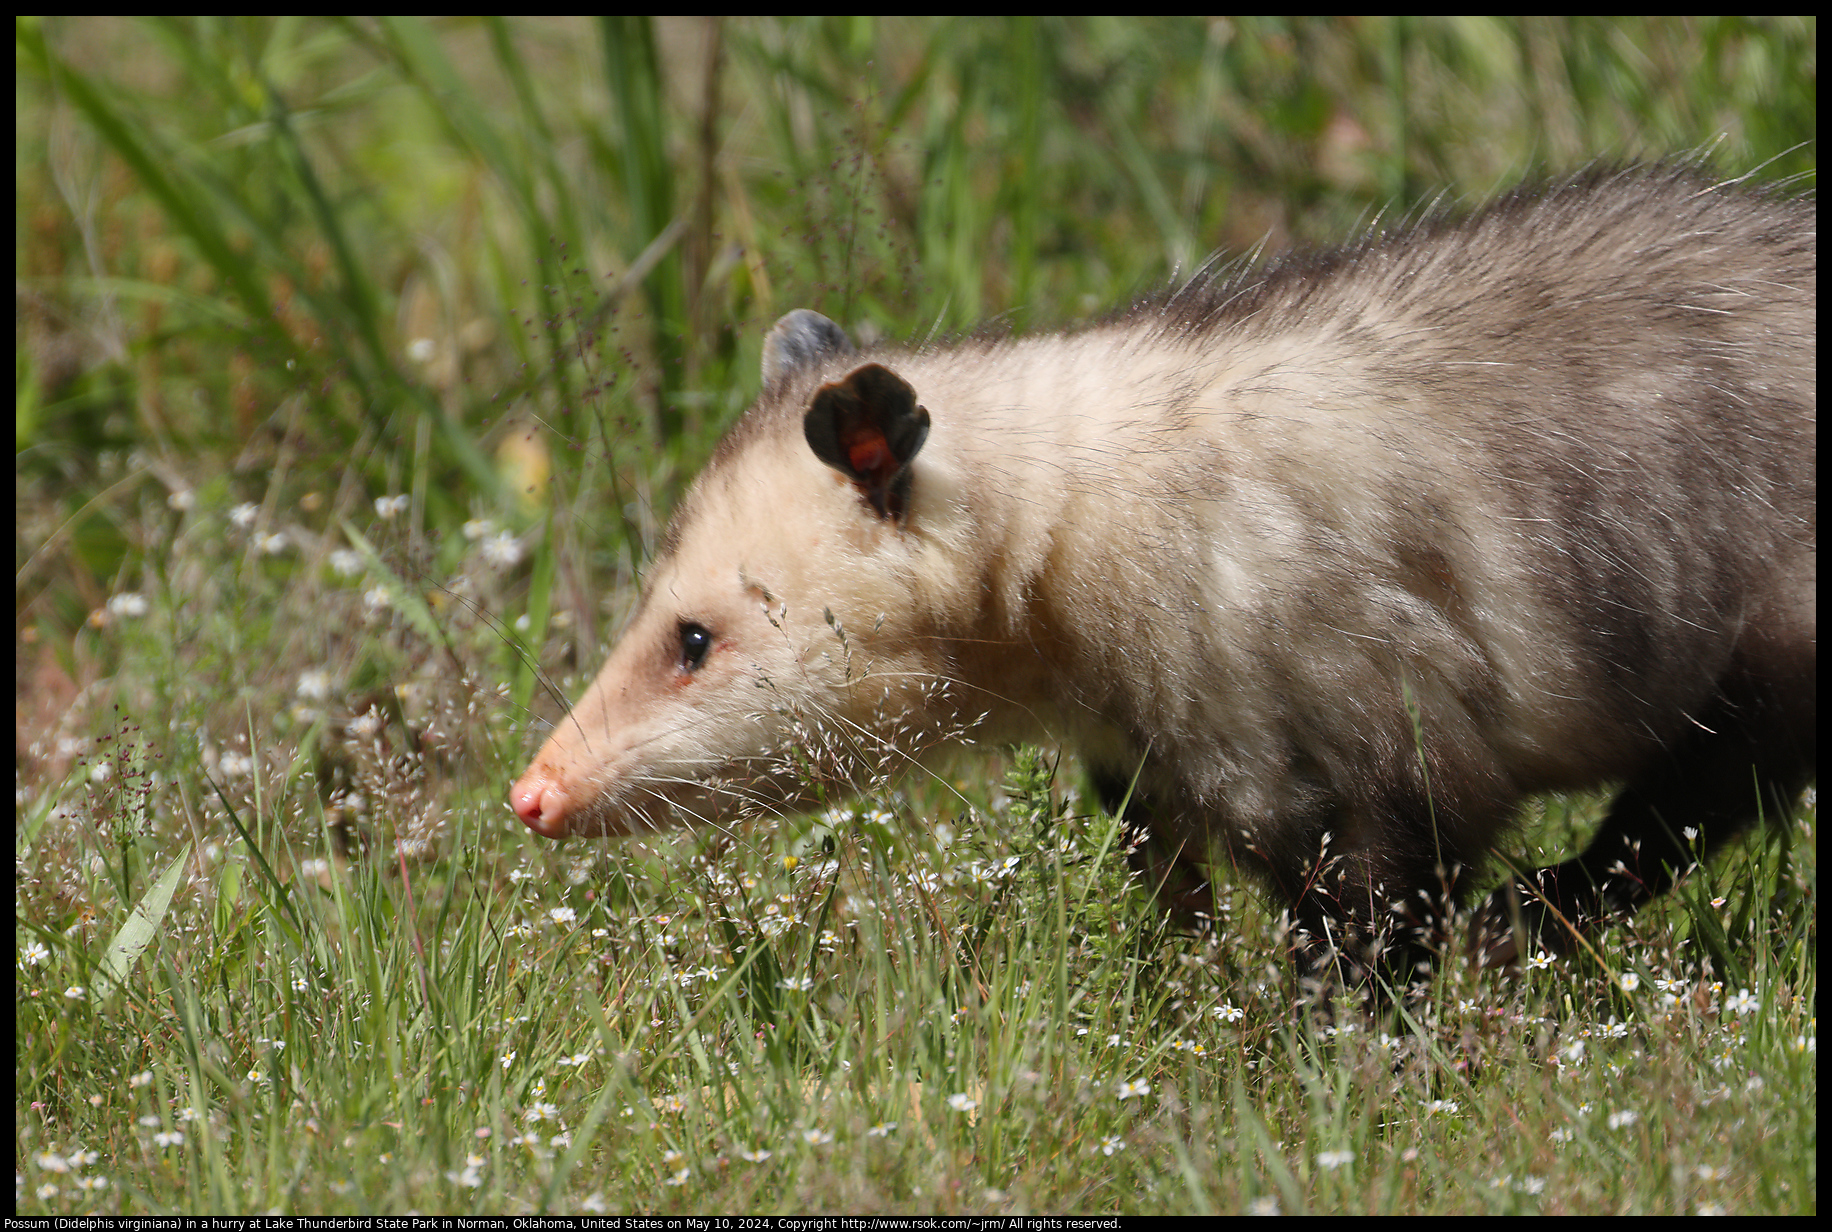 Possum (Didelphis virginiana) in a hurry at Lake Thunderbird State Park in Norman, Oklahoma, United States on May 10, 2024